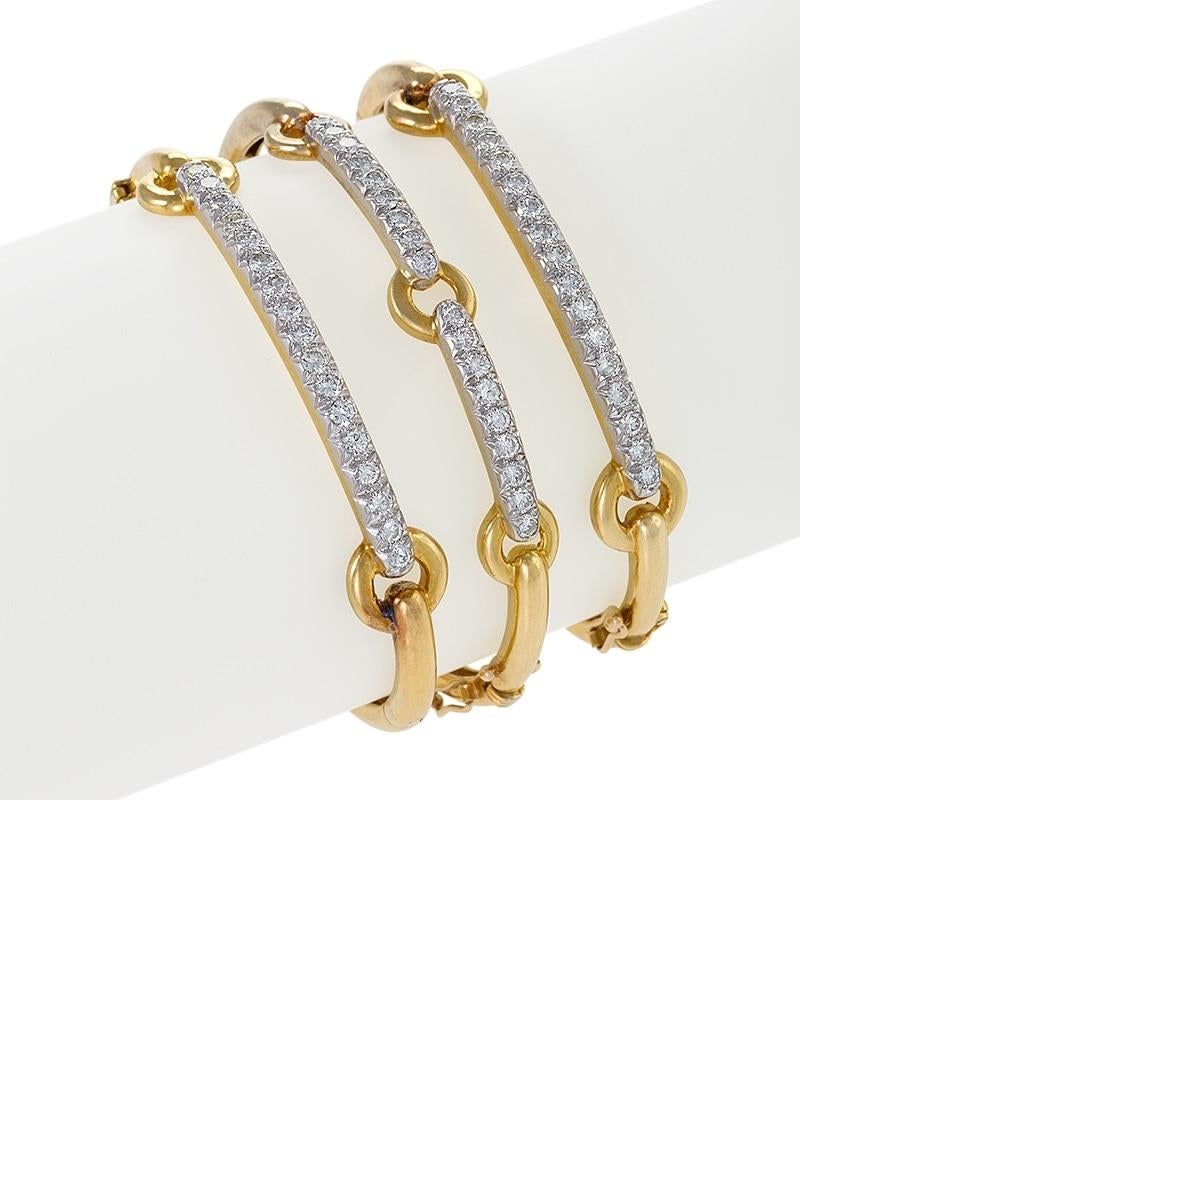 A set of three American modern 18 karat gold and platinum bangle bracelets, set with round brilliant-cut diamonds, with an approximate total weight of 3.75 carats, by David Webb. The diamonds have a G-H color and VS clarity grade. 

This stylish set